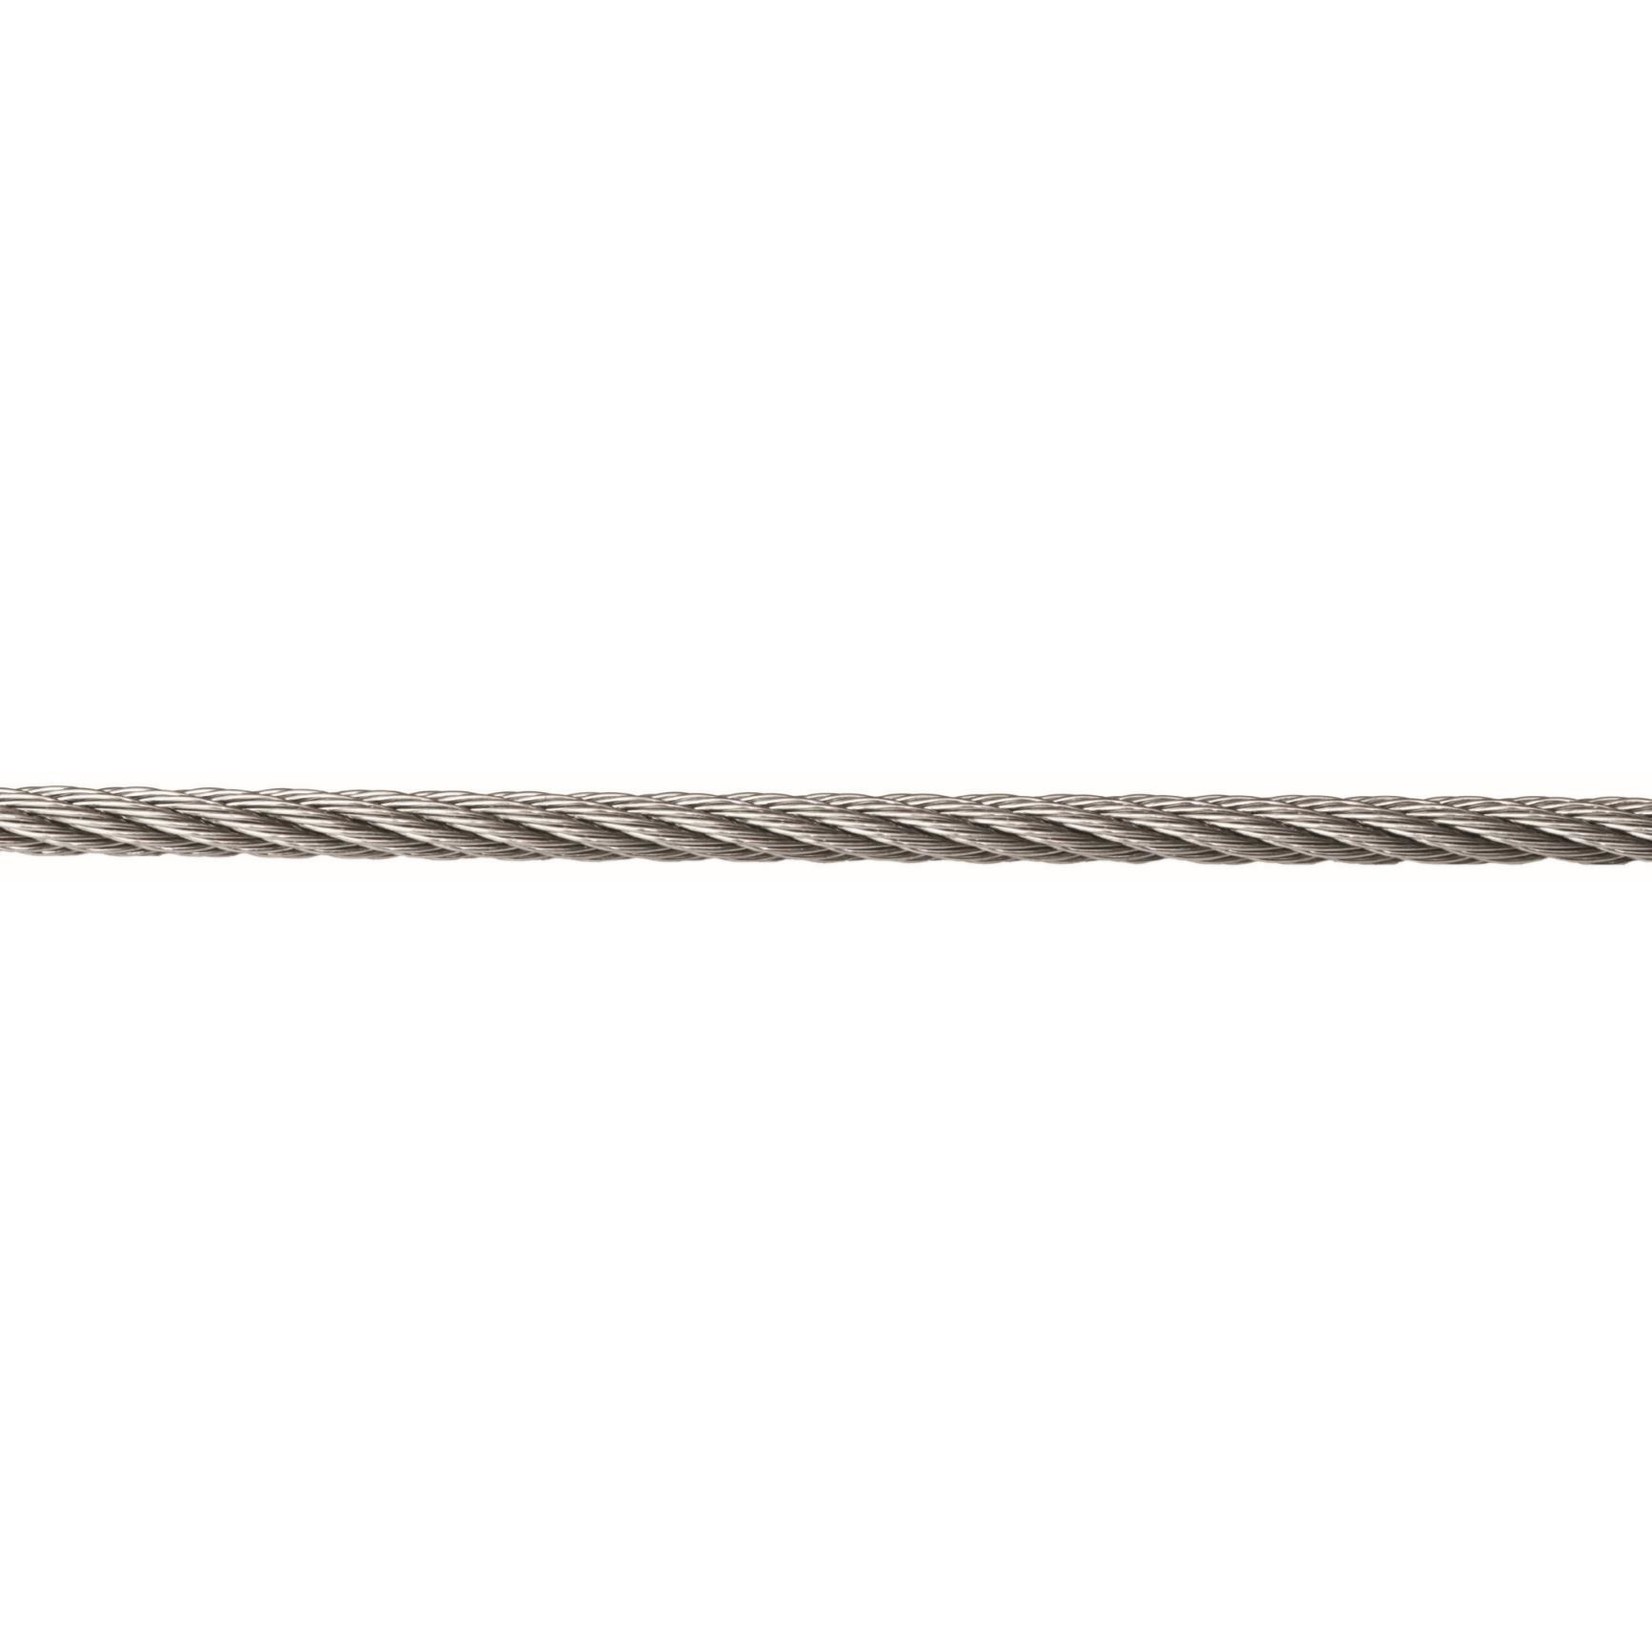 U-Rope Stainless steelwire 316 7x7 3mm